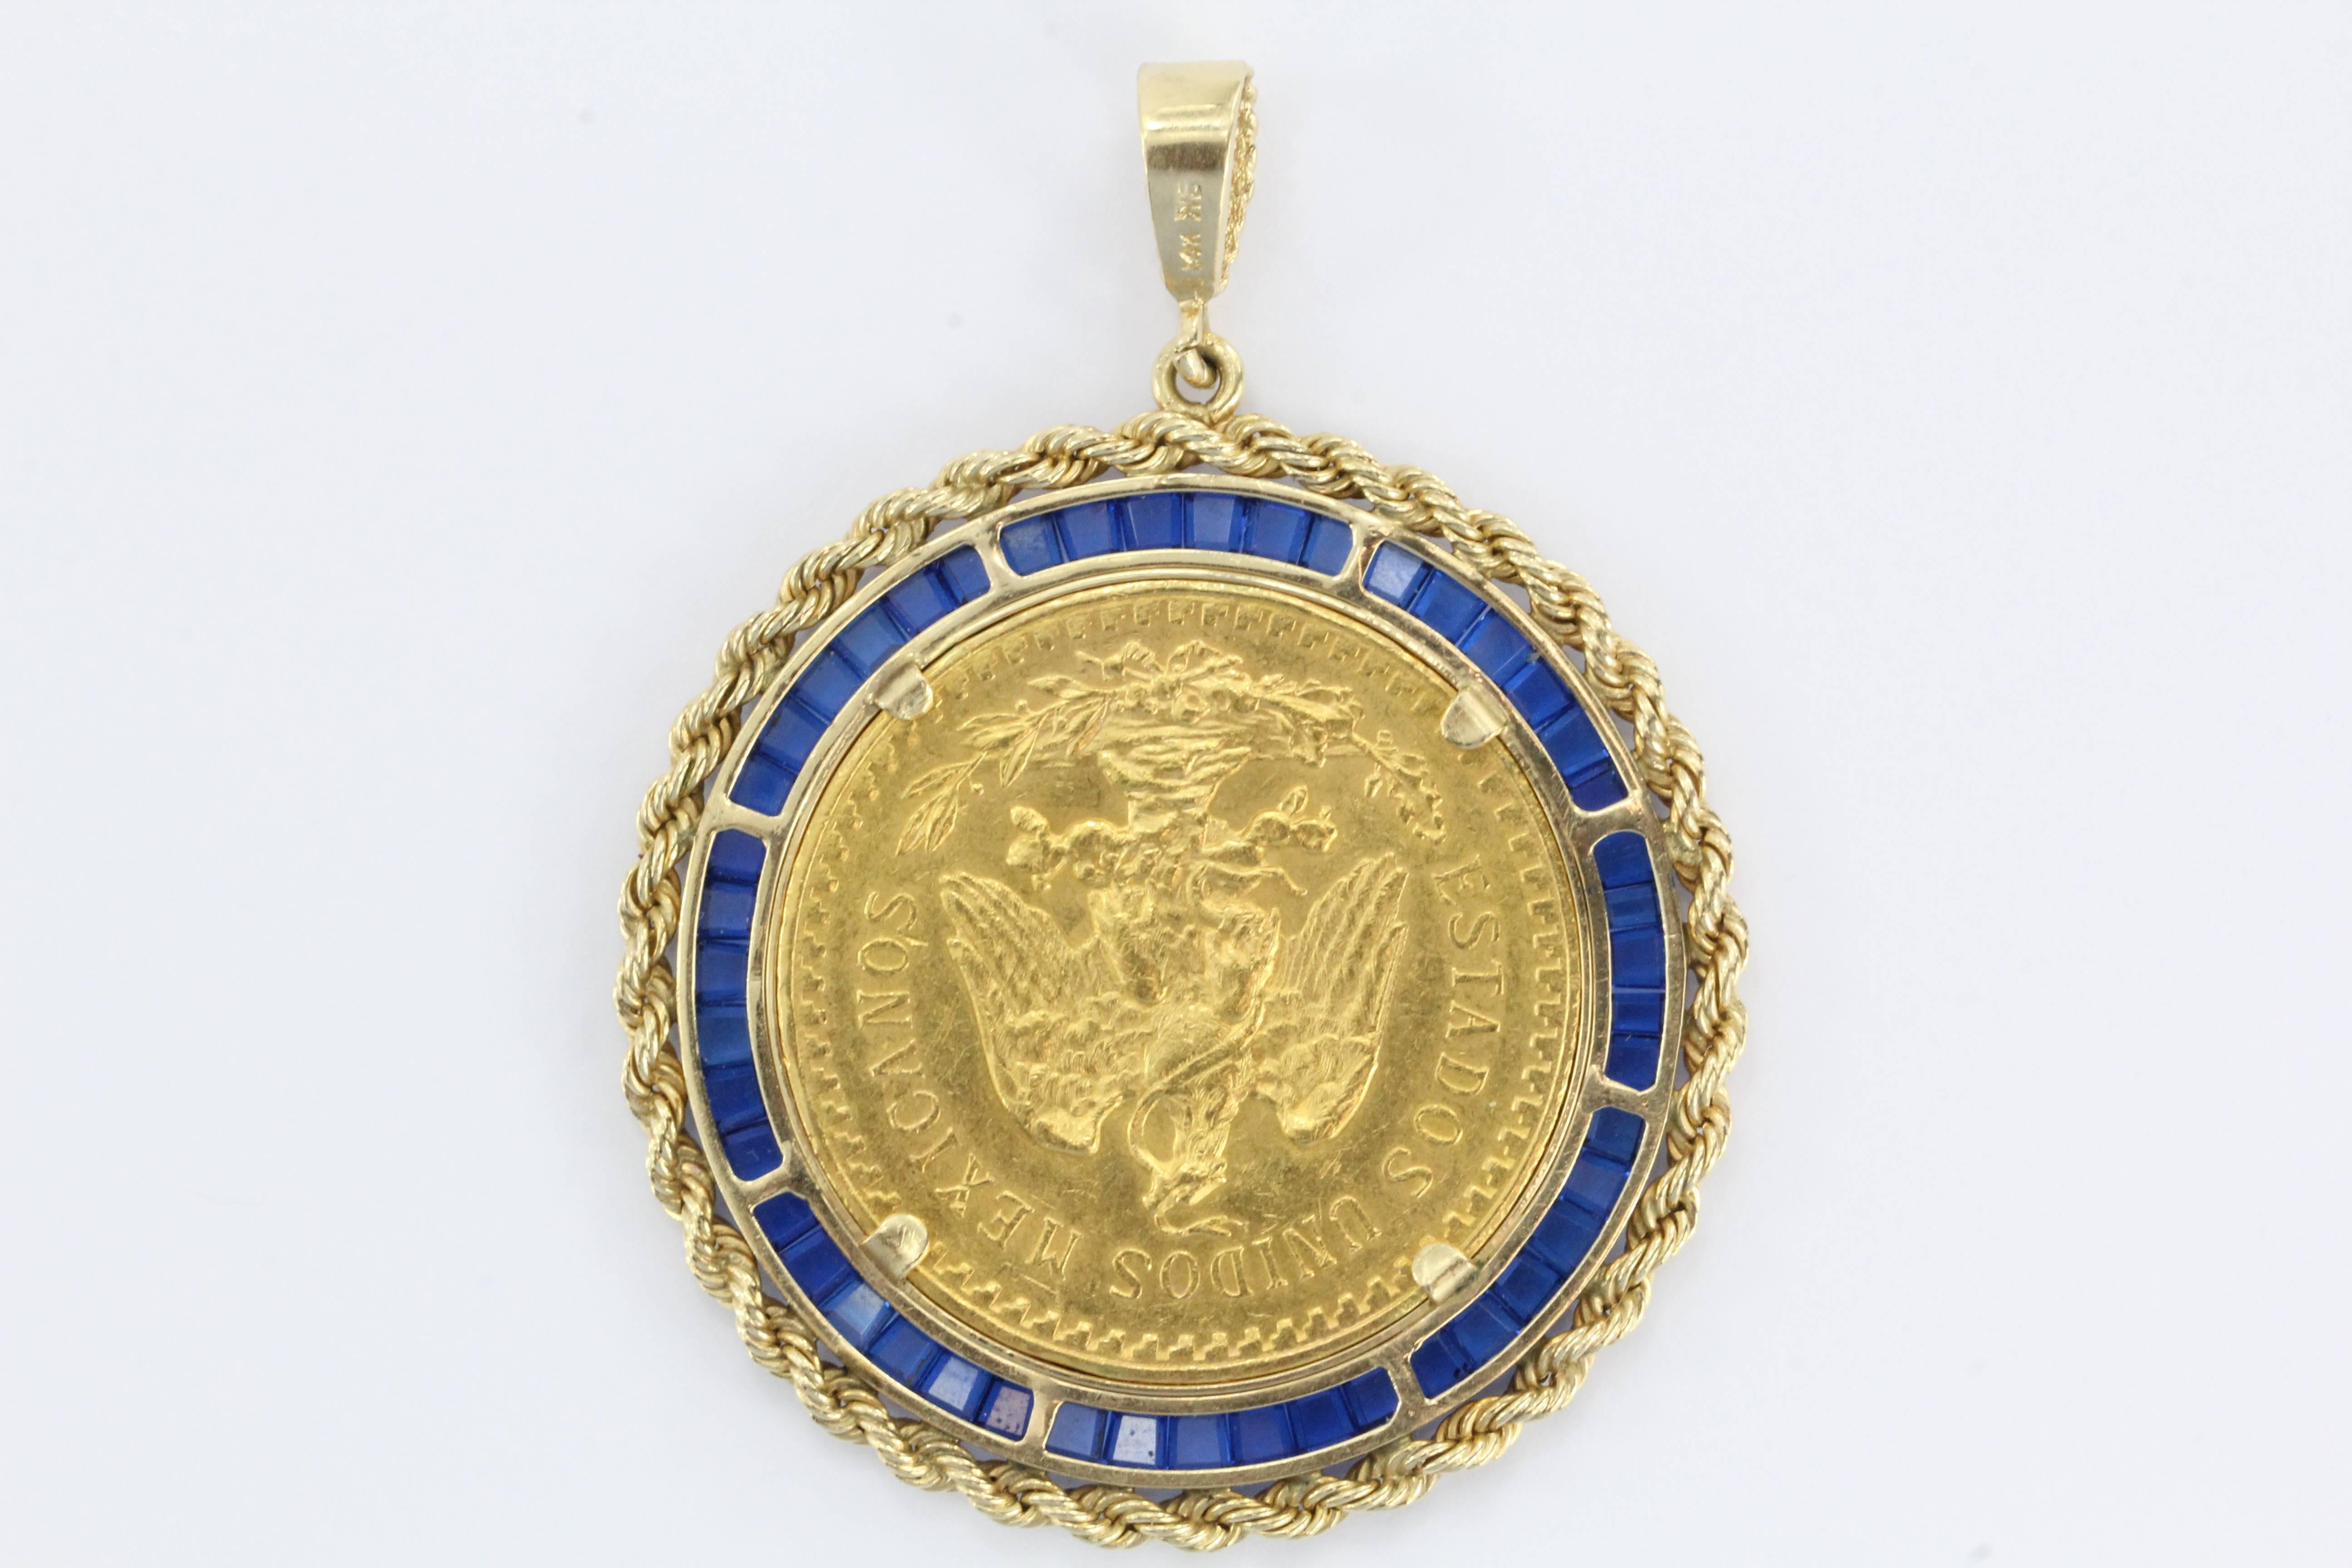 Large 1923 Gold Angel Coin Pendant set in 14K Yellow Gold & Sapphire Bezel. The pendant is in excellent estate condition and ready to wear. The coin is a 1923 Mexican 50 Peso gold coin. The coin is 90% / 21.6 Carat Gold and weighs 1.2057 Troy oz NOT